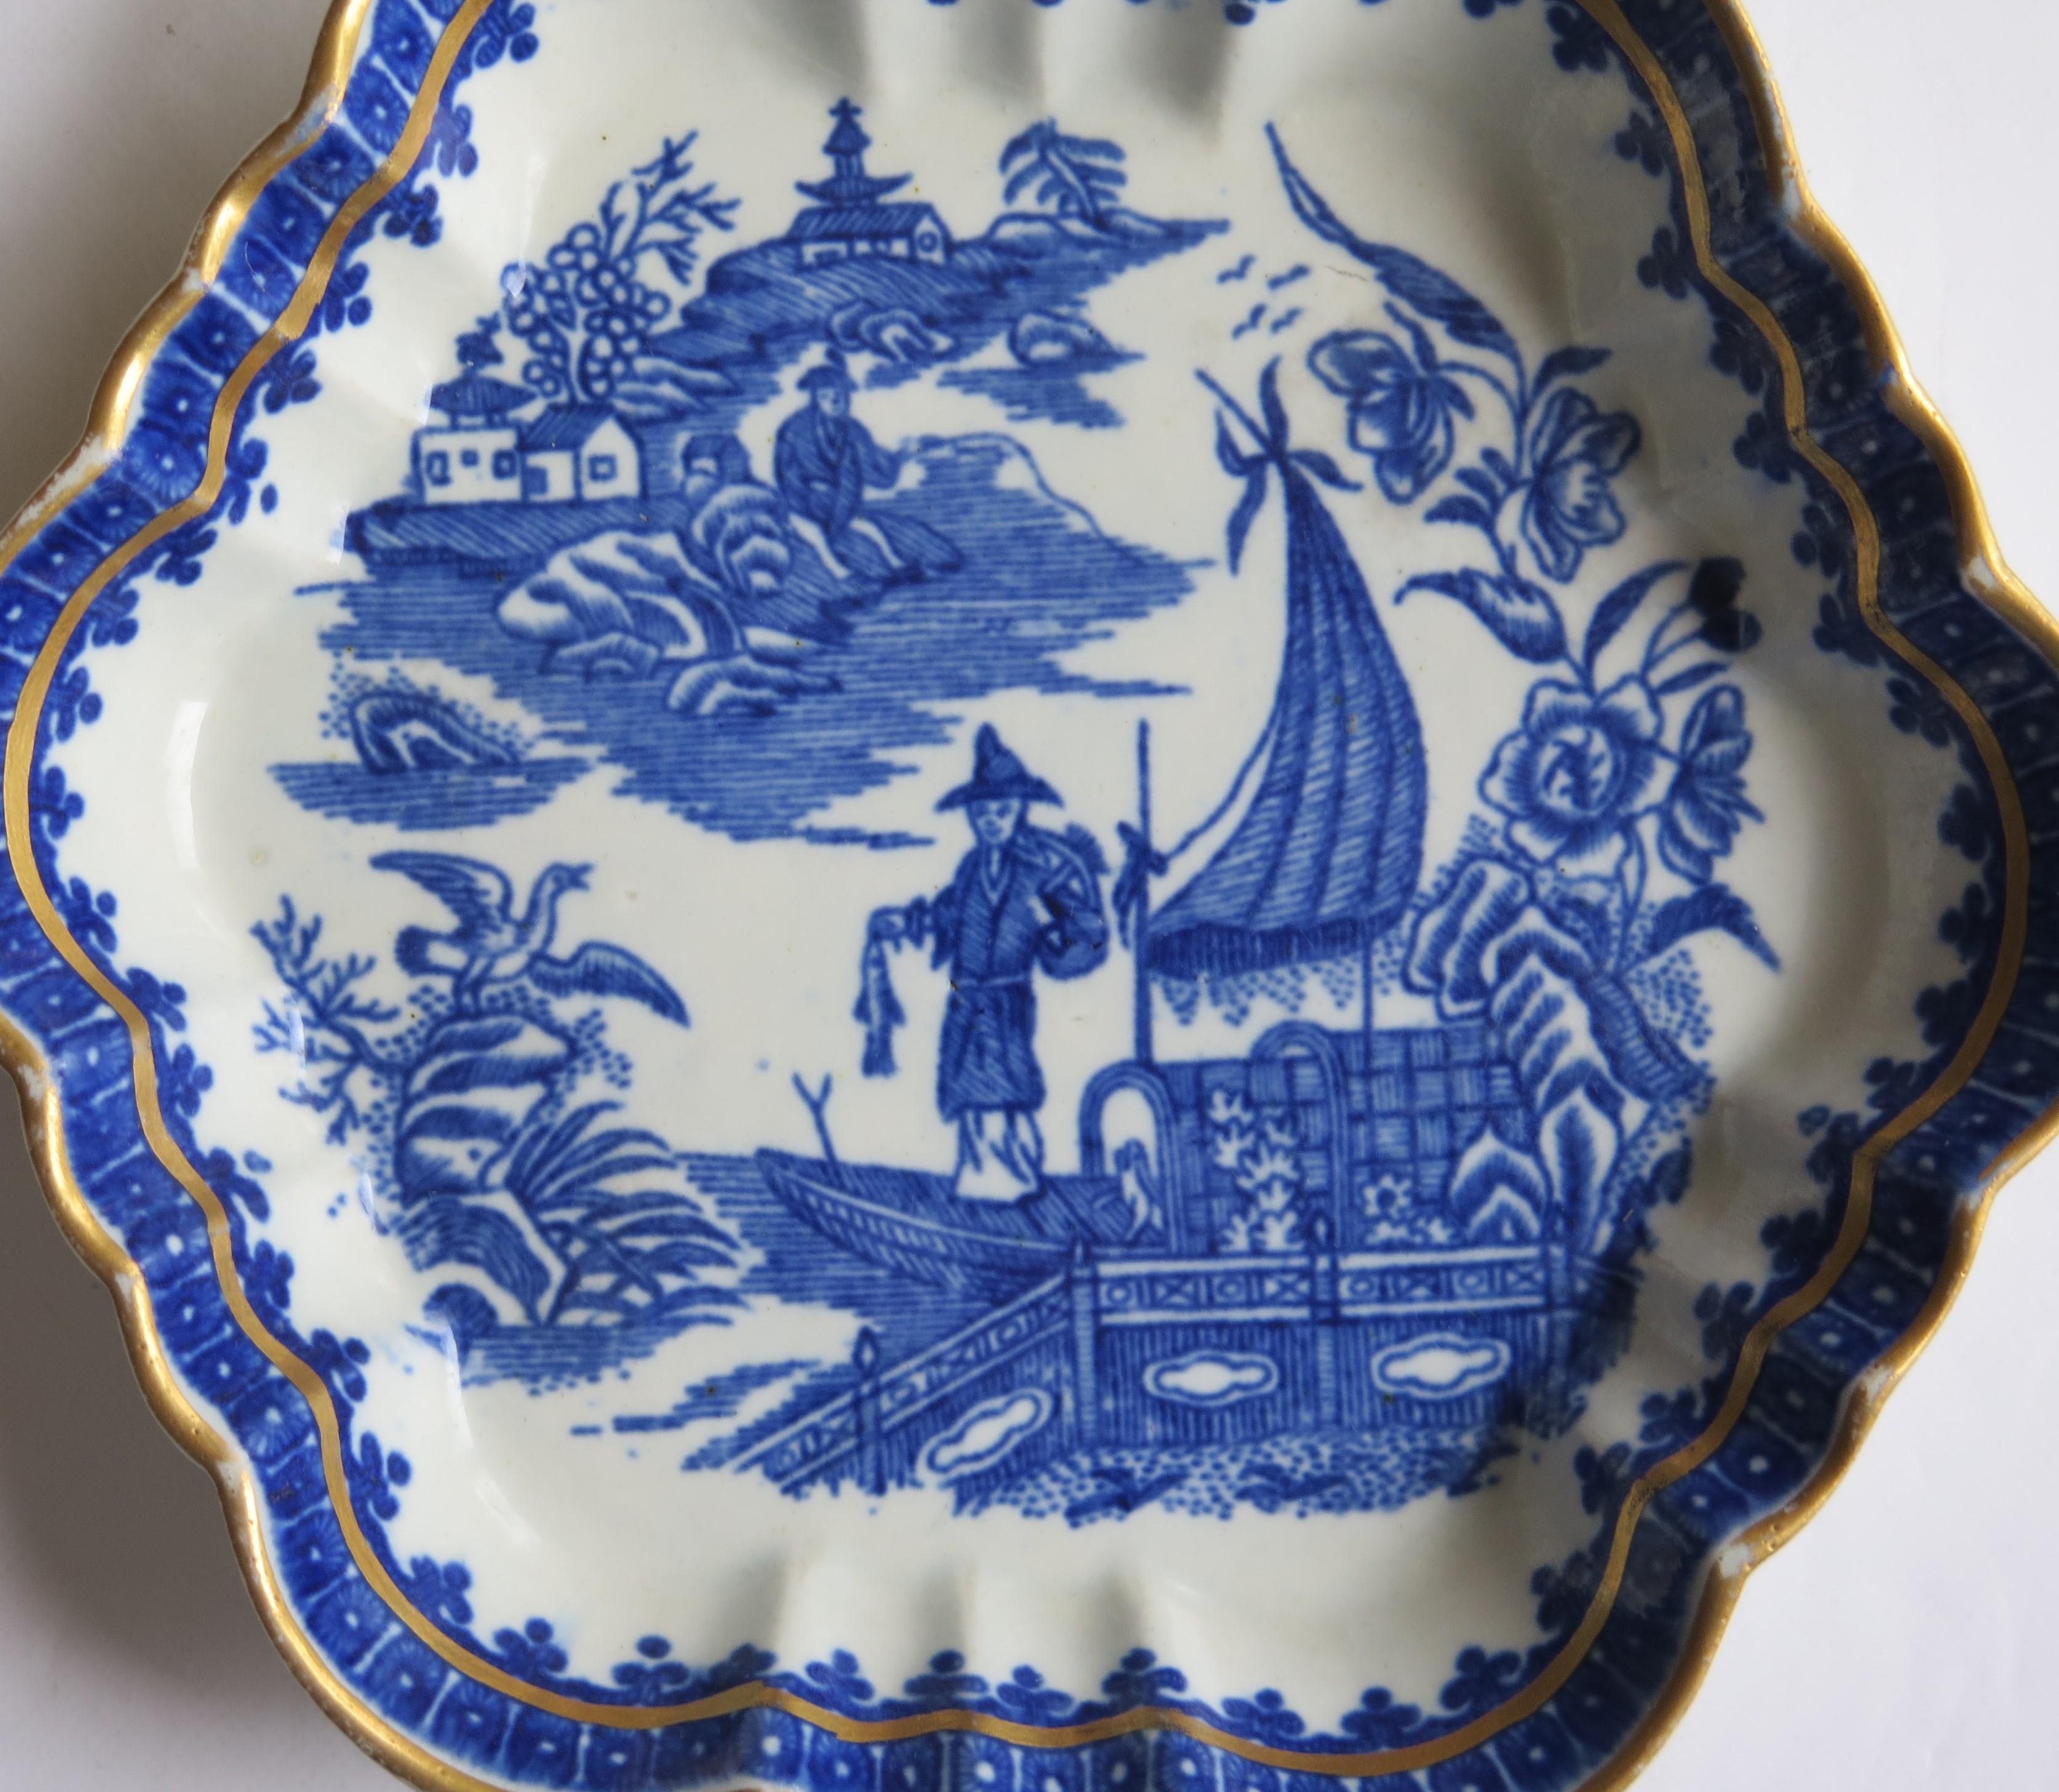 This is a very good 18th century, First period (Dr. Wall), Worcester porcelain teapot stand, printed in cobalt blue with the 